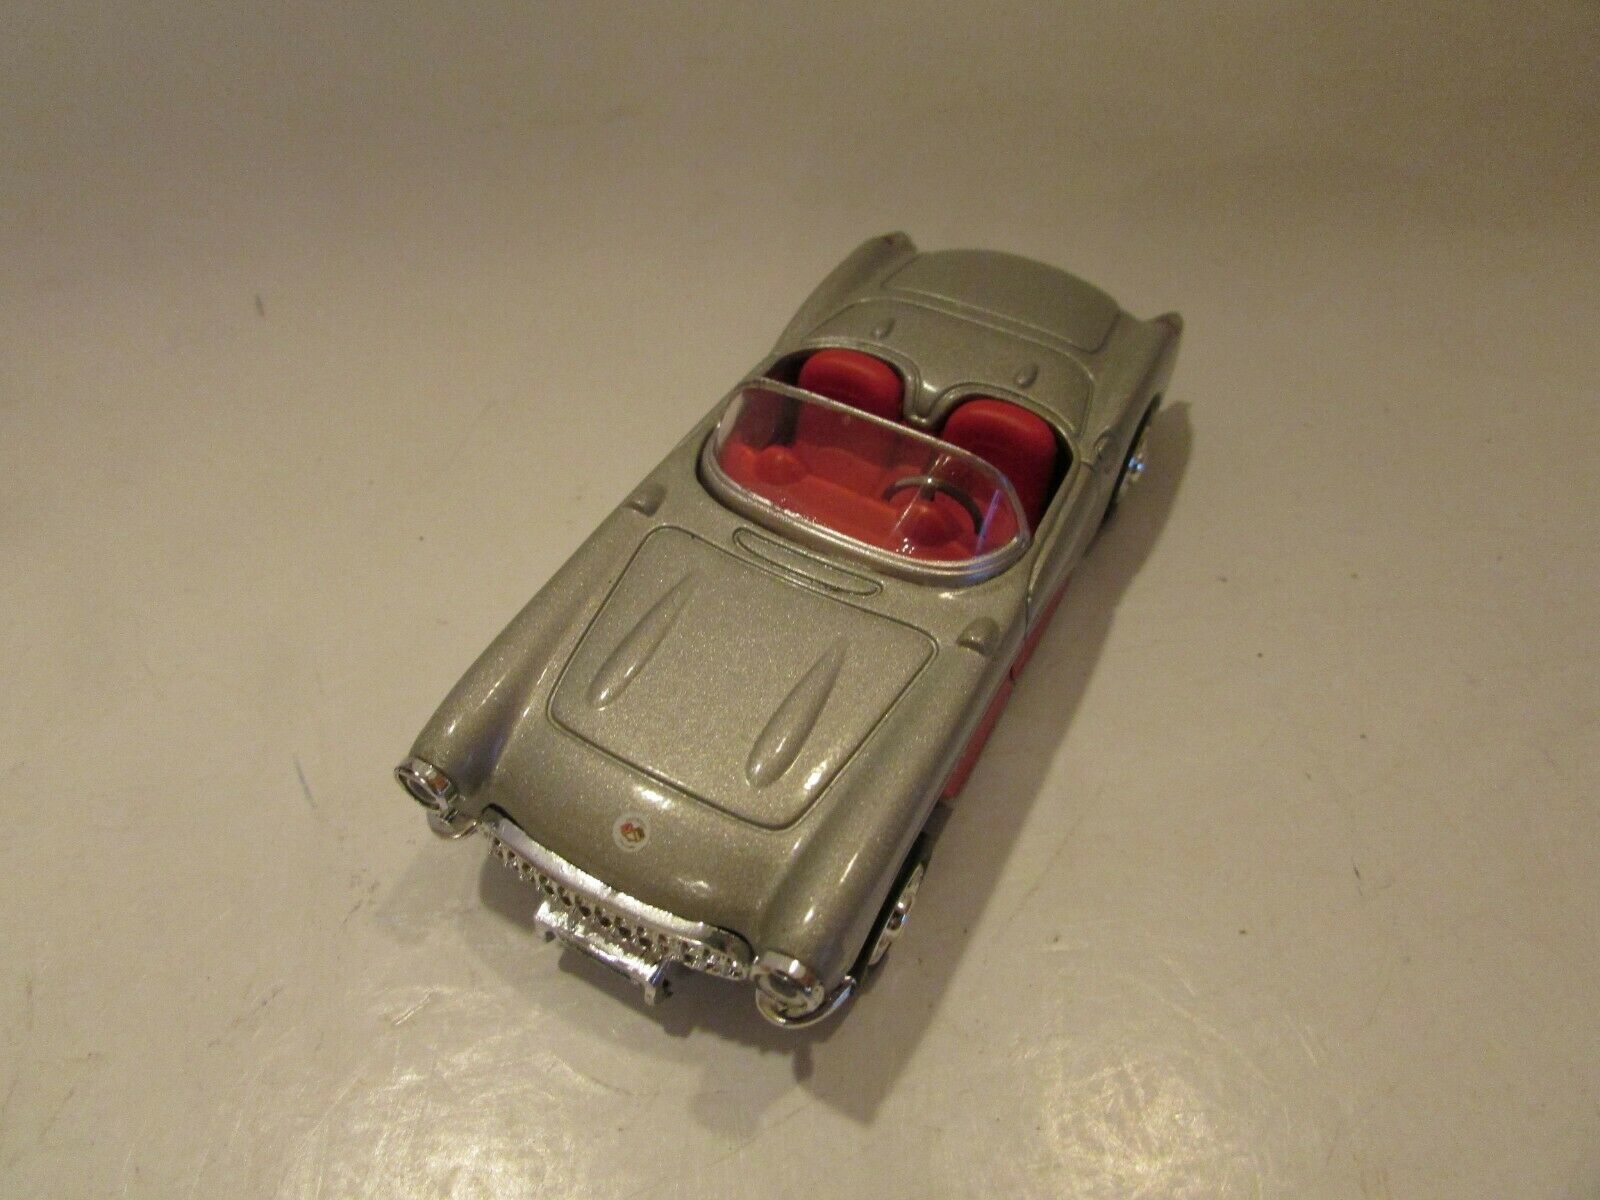 NEW RAY DIECAST CAR 1957 CORVETTE CONVERTIBLE SILVER 1/43RD SCALE M24 - $5.53